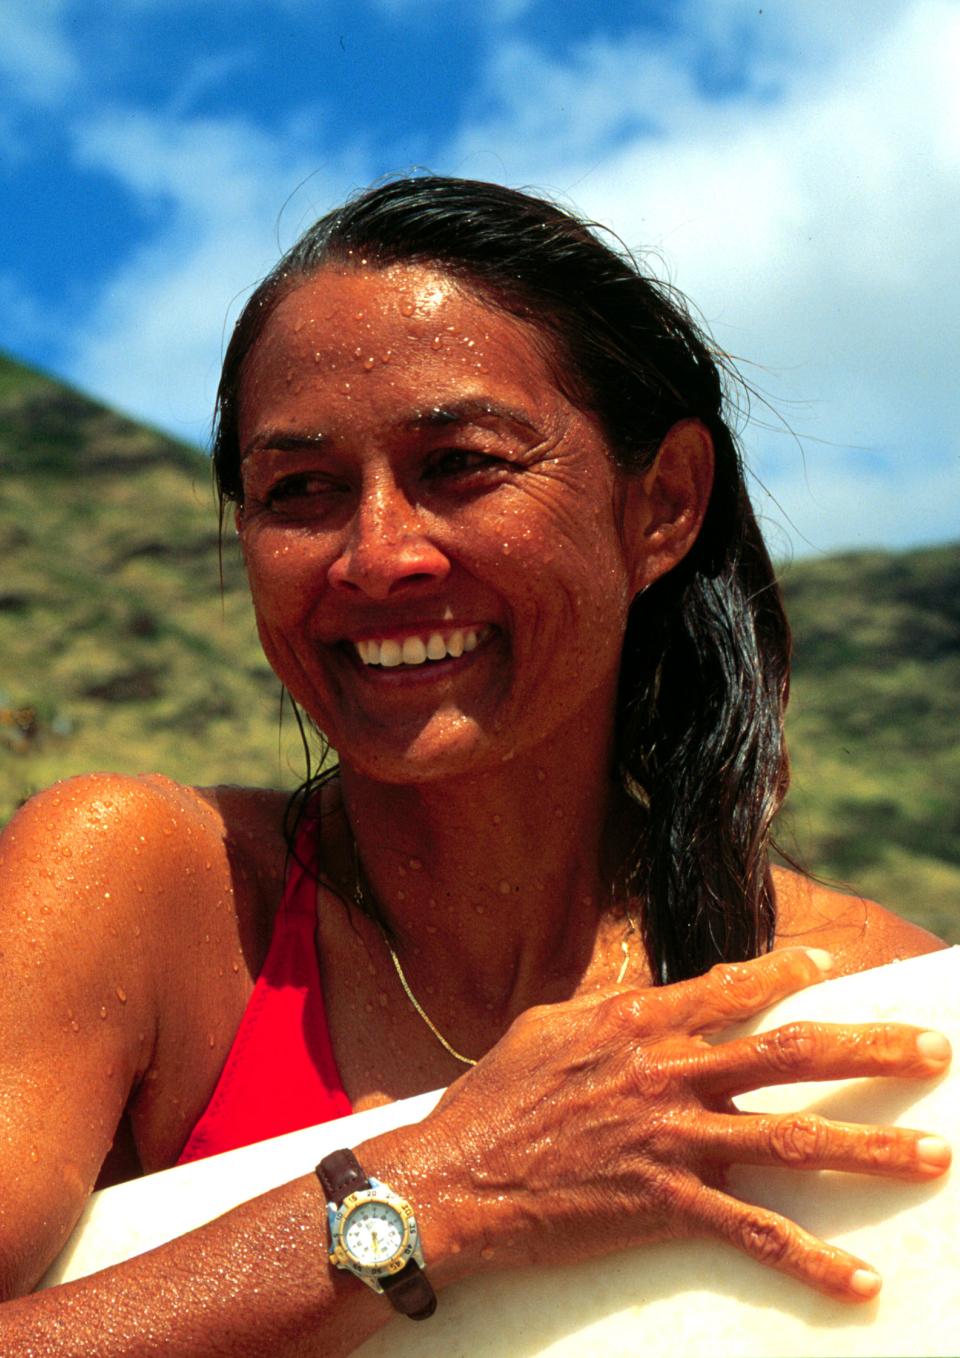 Rell Sunn, a Hawaiian woman, stands outside against a backdrop of lush green mountains and a blue sky with wispy clouds. She is wet with ocean water, her long hair pulled over to the right and draped over her shoulder. She holds a surfboard under her left arm and up against her body and smiles as she looks out to the distance.